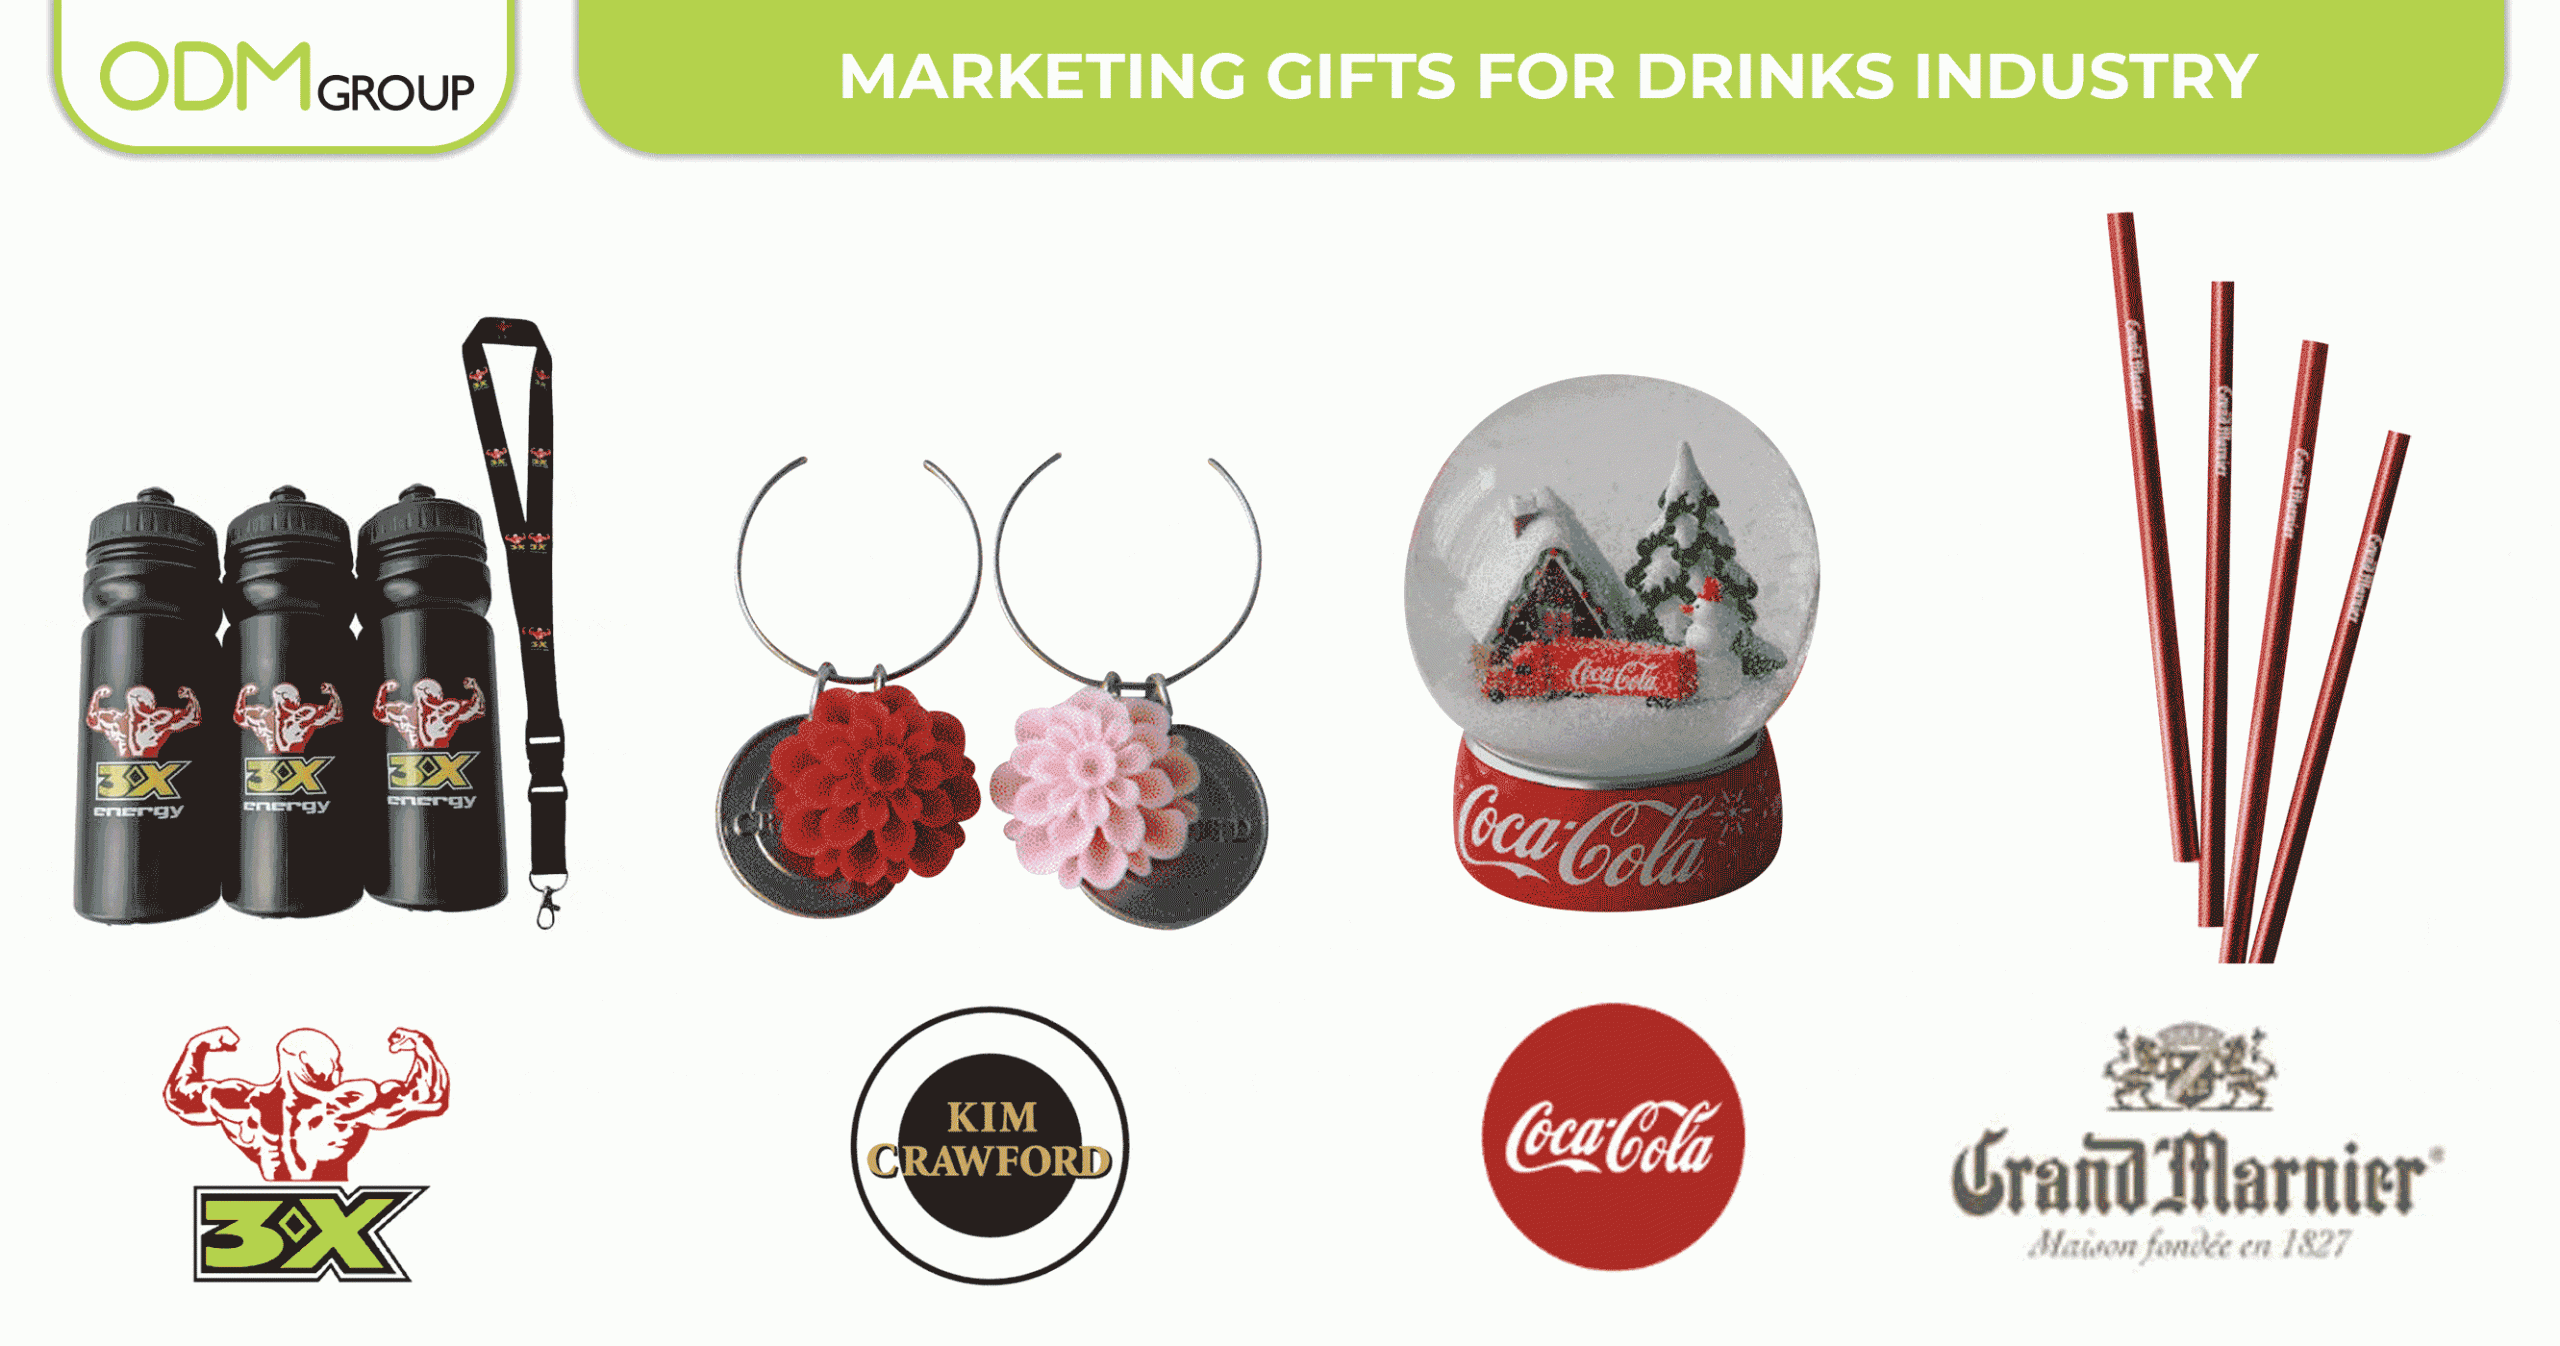 Marketing Gifts for Drinks Industry